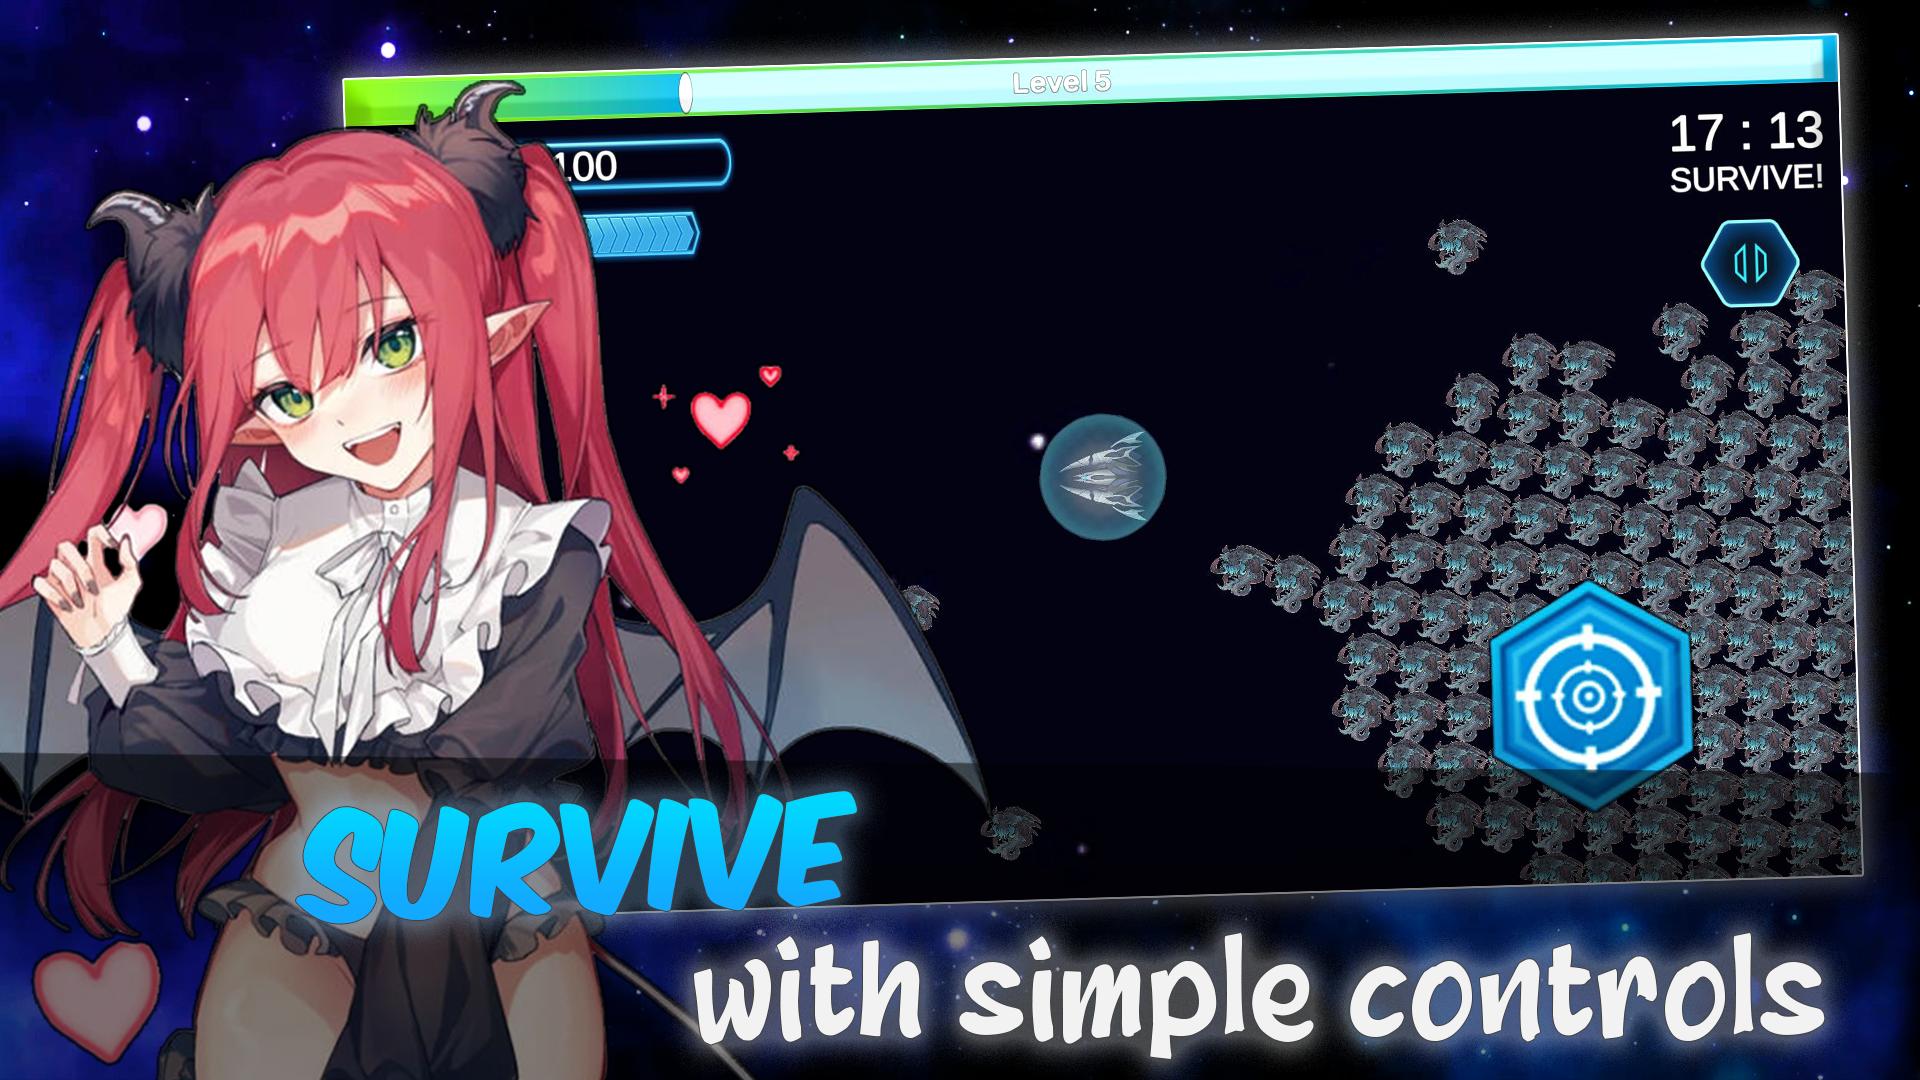 Anime: The Multiverse War For Android- APK Games